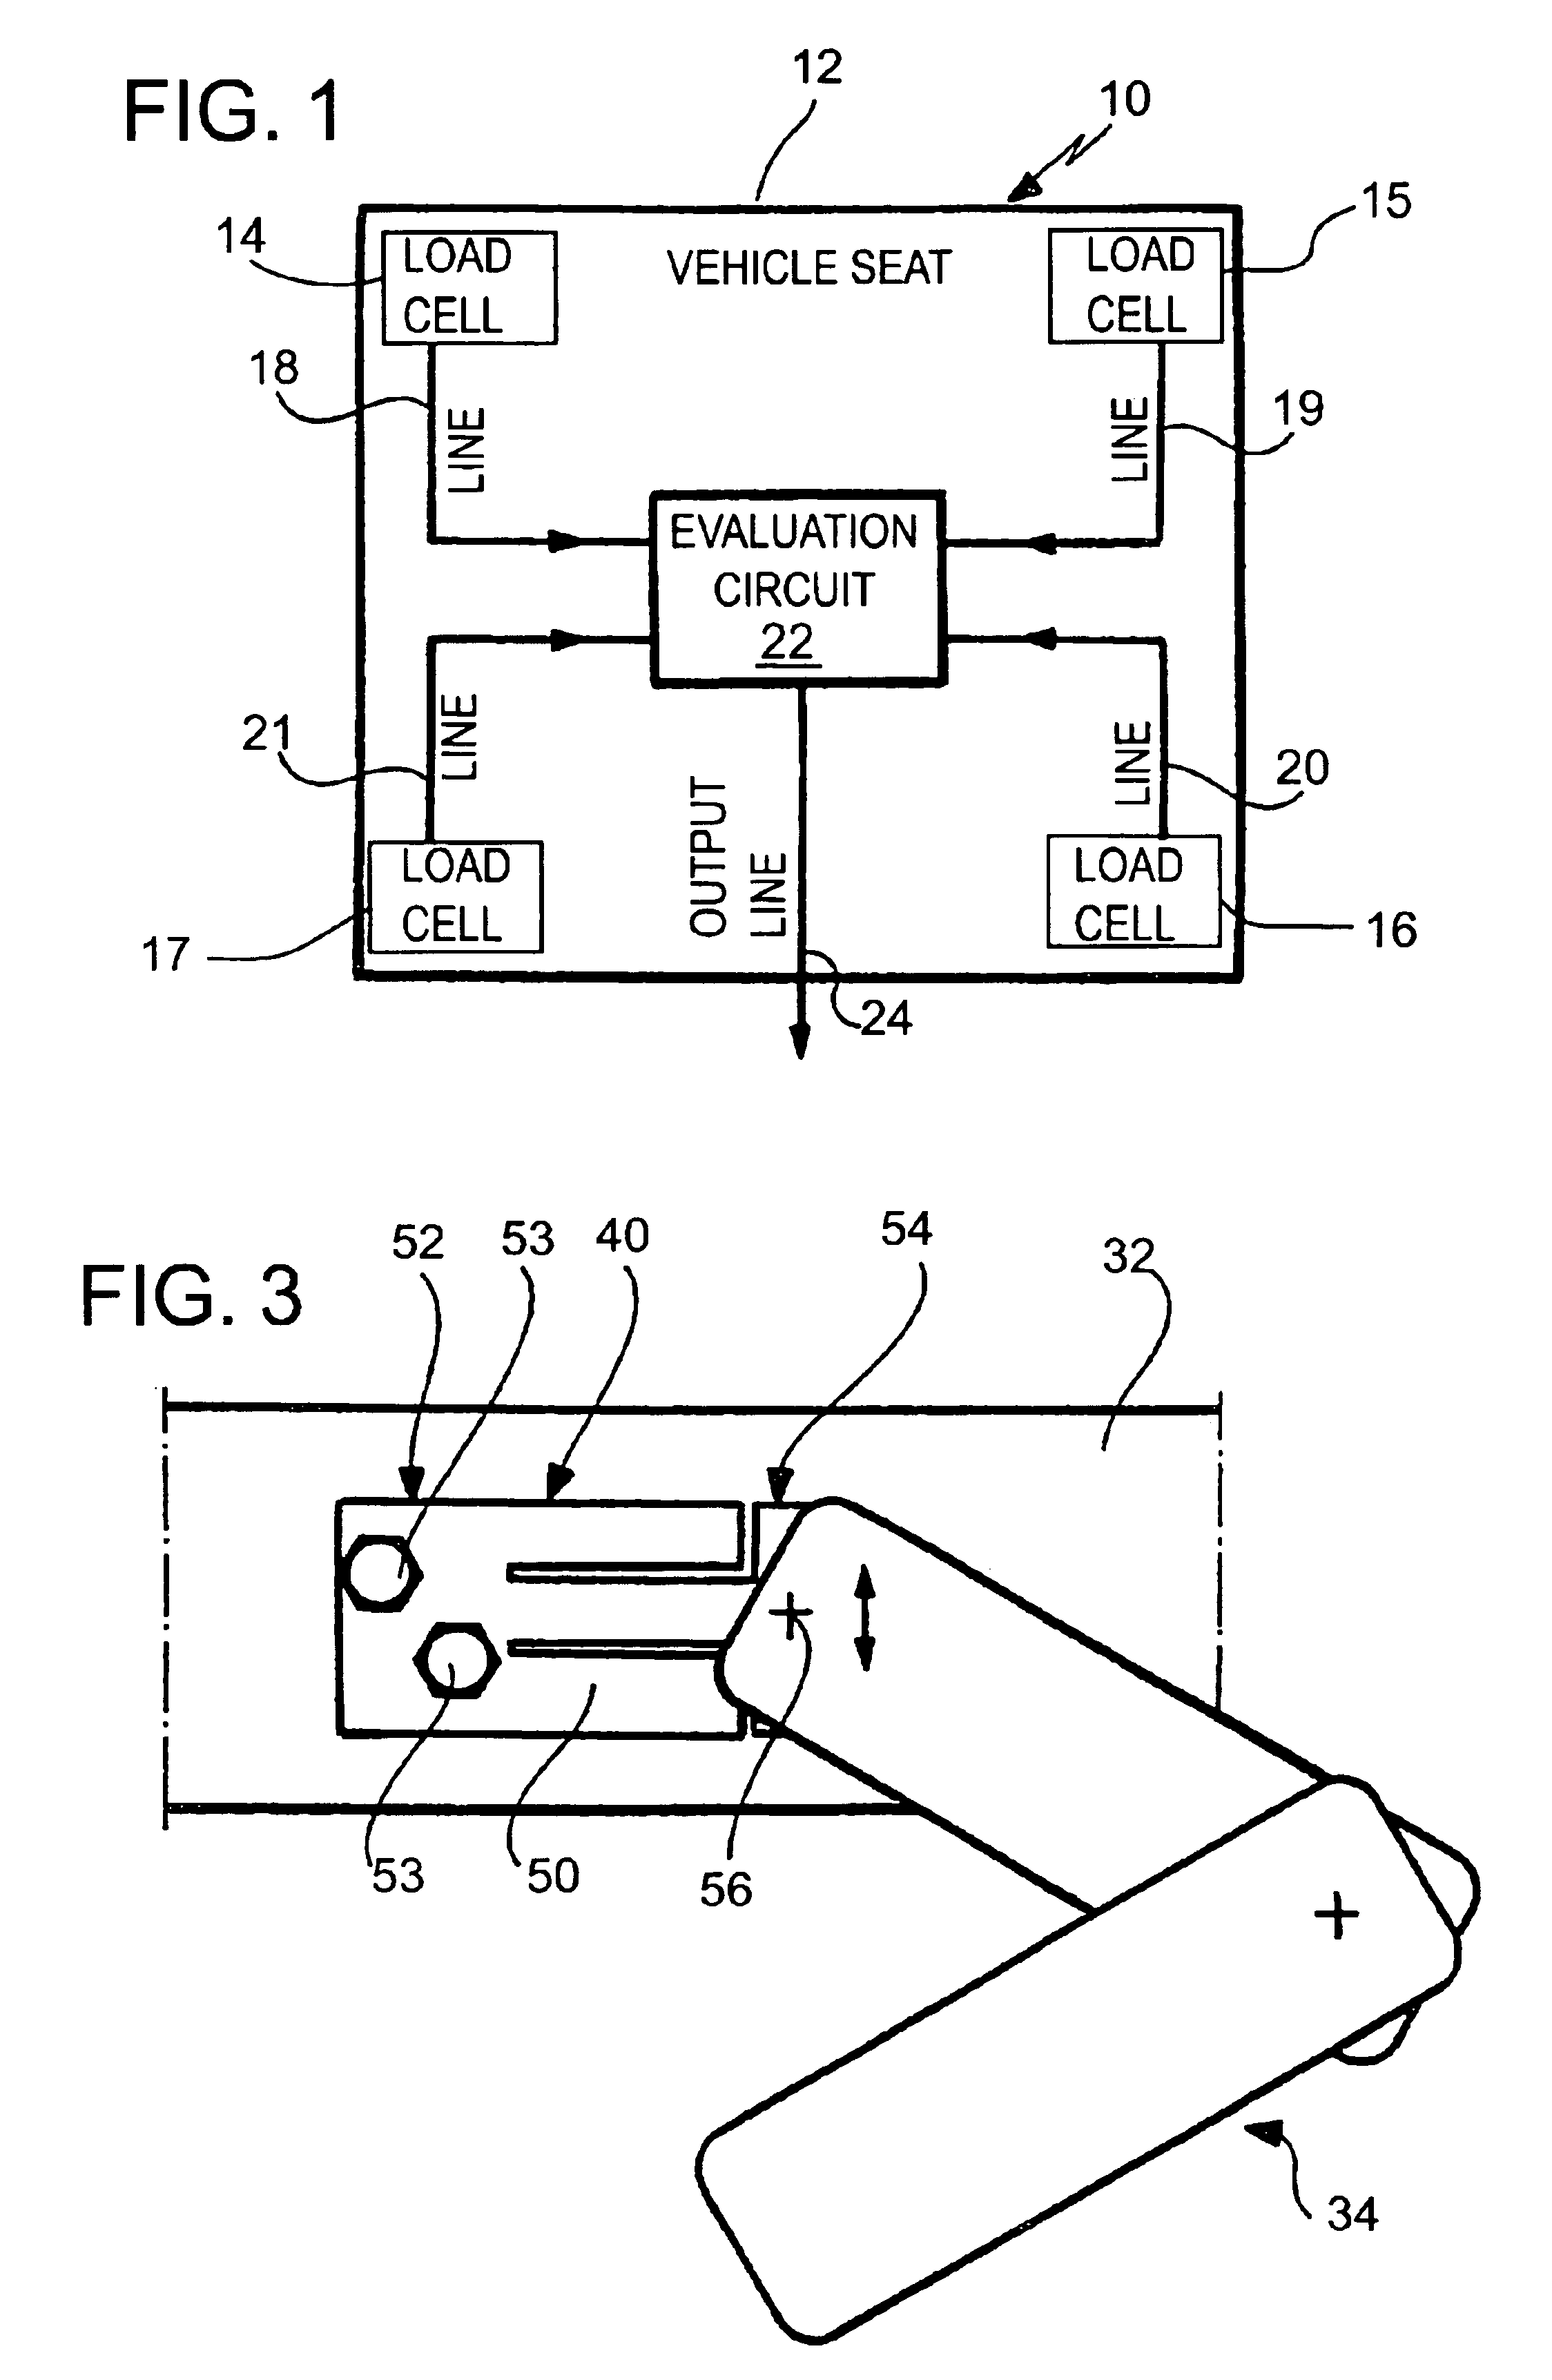 Device and method for detecting and preprocessing weights acting on a vehicle seat